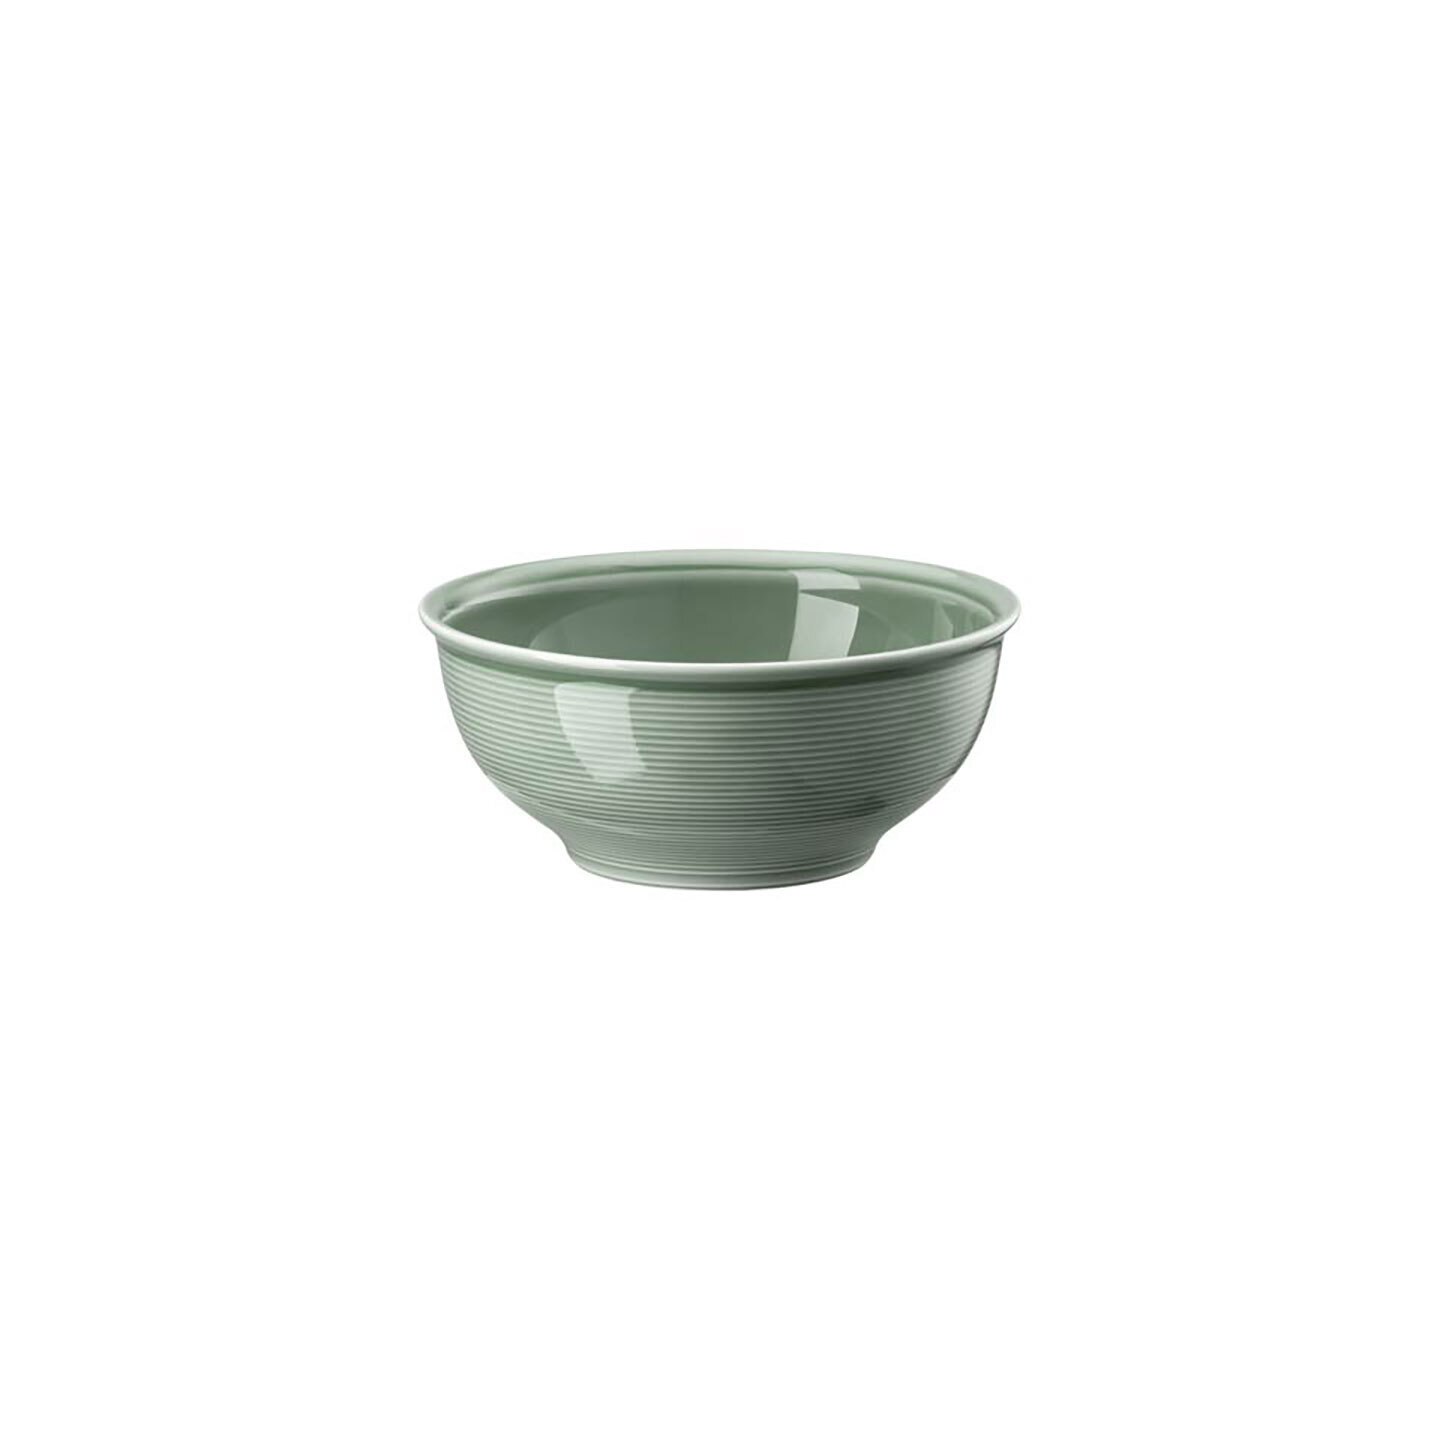 Thomas Trend Moss Green Cereal Bowl 11400-401922-15266